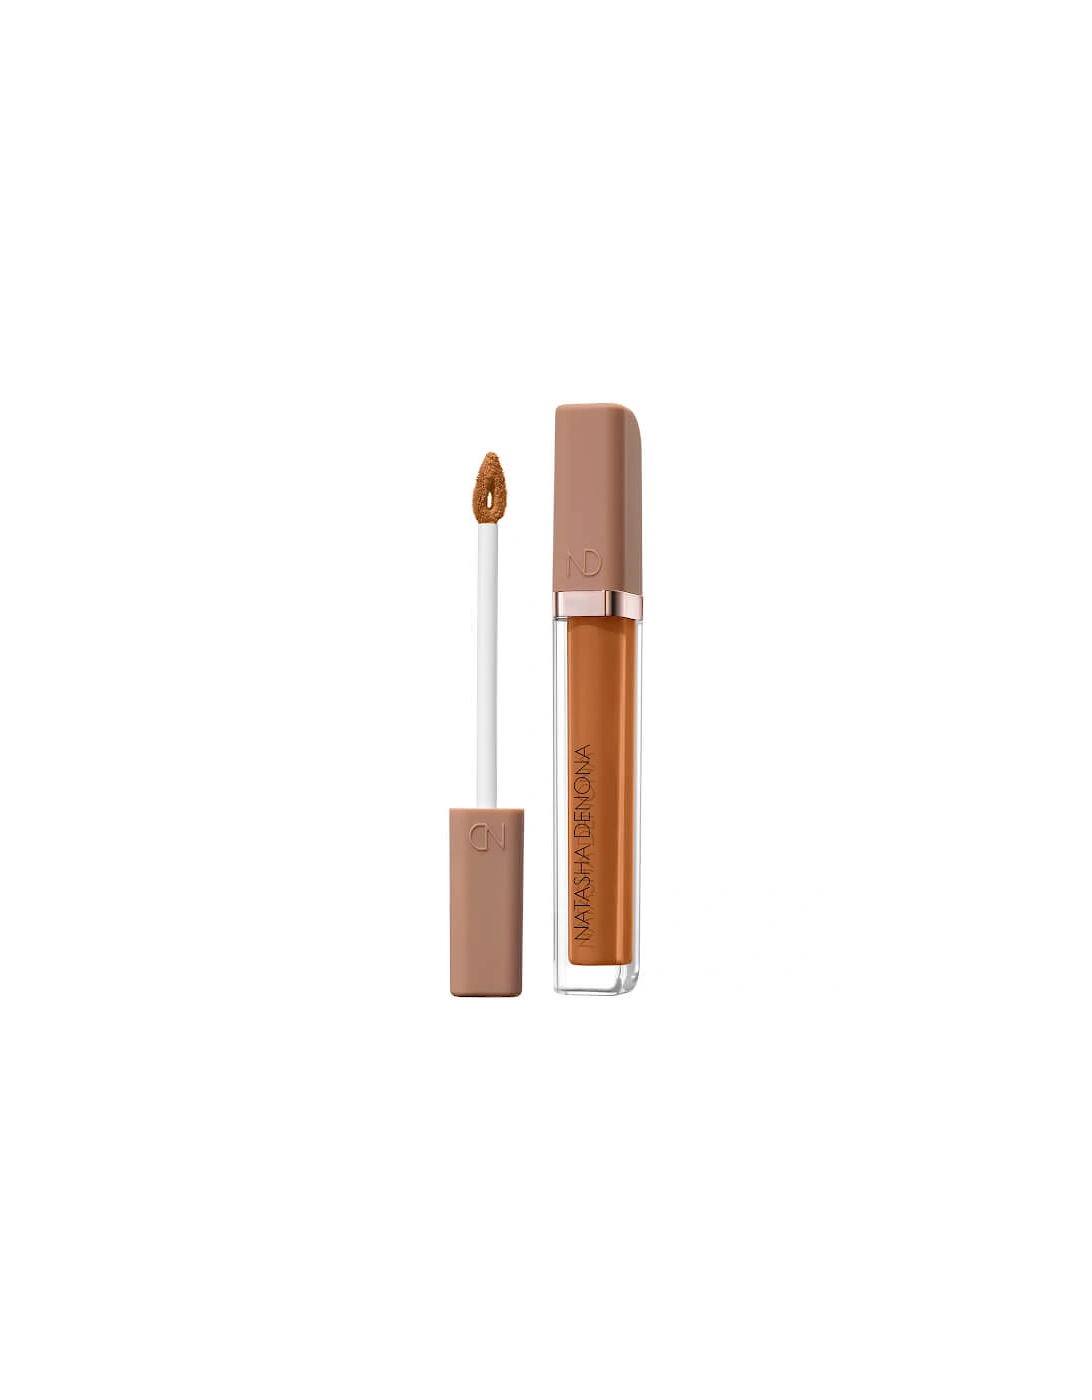 Hy-Glam Concealer - P8, 2 of 1